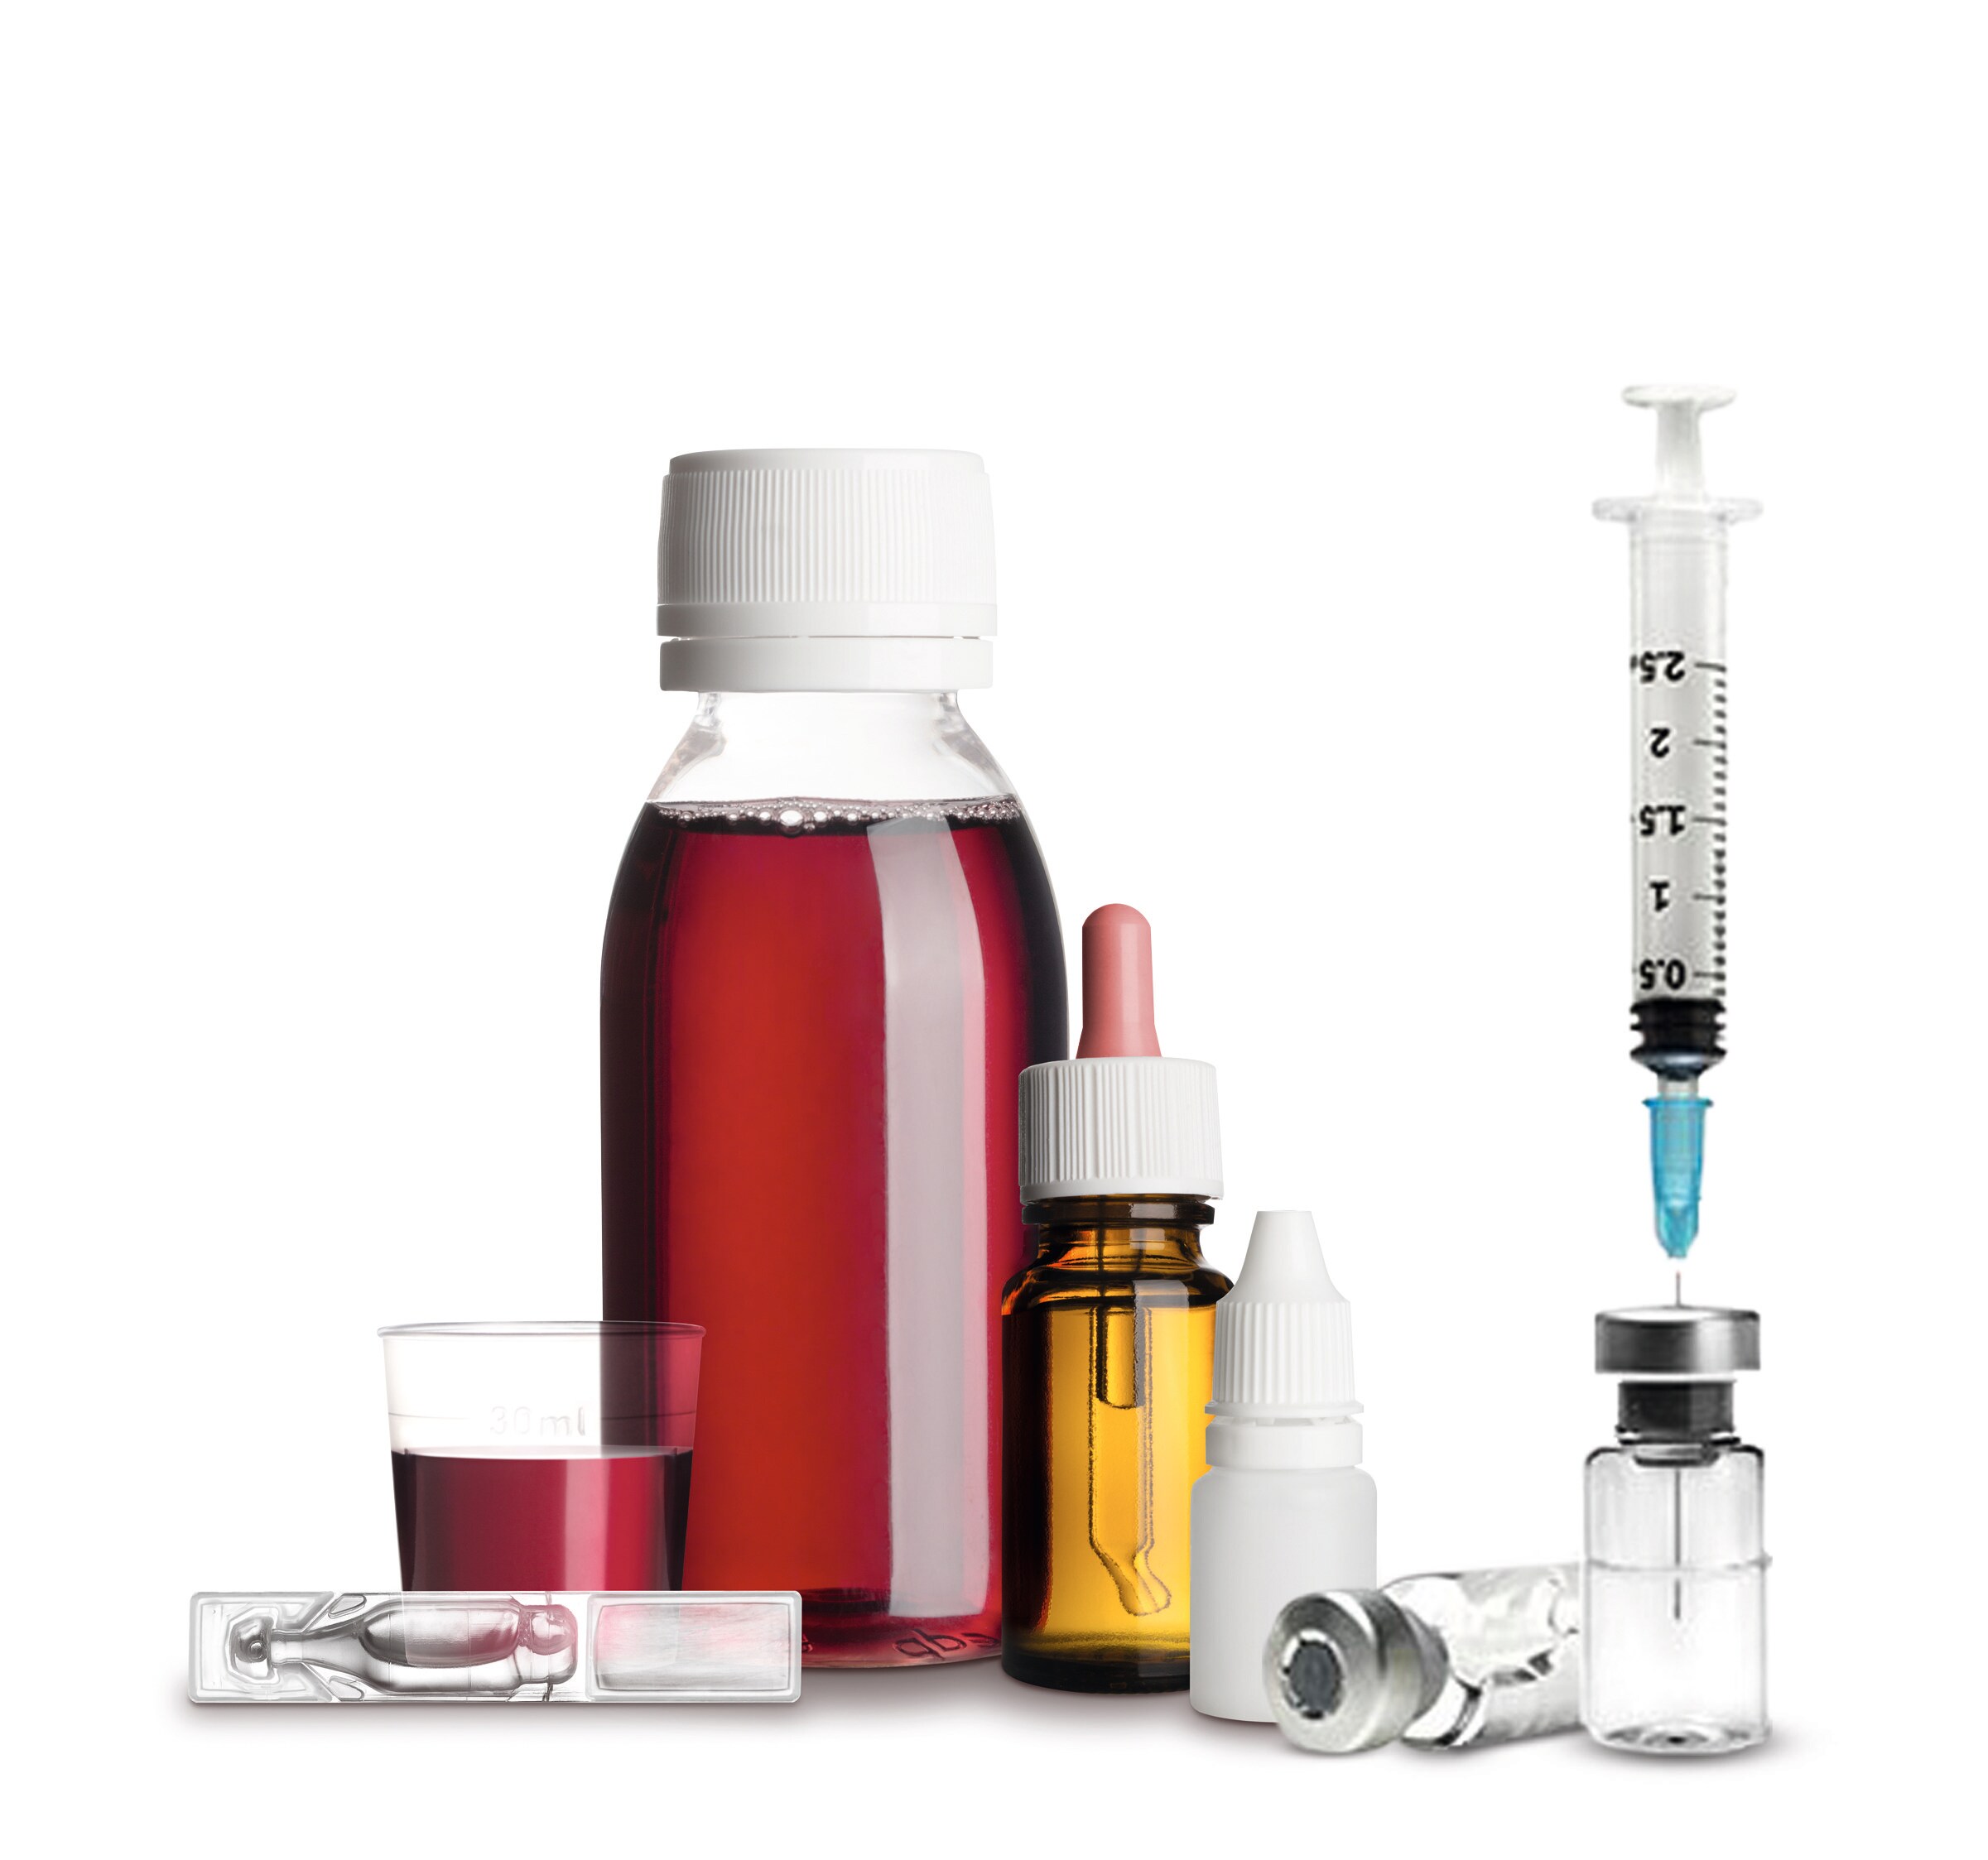 From left to right, the image shows a cup with a red liquid, a glass container of the same red liquid, a brown glass vial with a dropper for a lid, a plastic bottle of eye drops, a glass vial lying on its side, and a glass vial containing a clear liquid with a syringe inserted at the top.